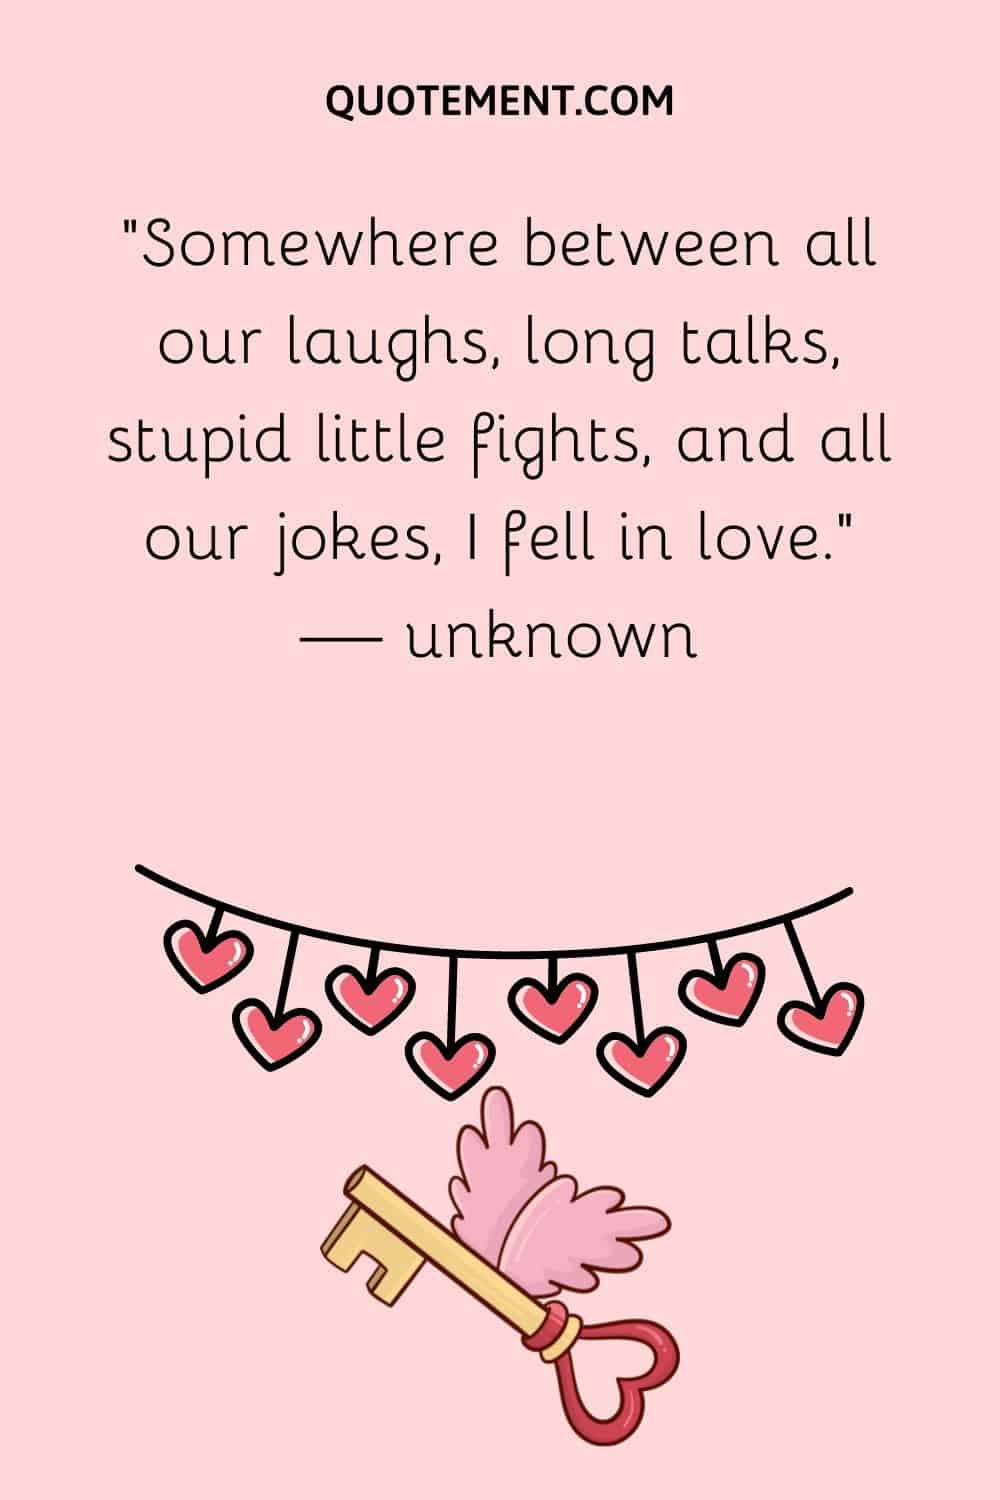 “Somewhere between all our laughs, long talks, stupid little fights, and all our jokes, I fell in love.” — unknown